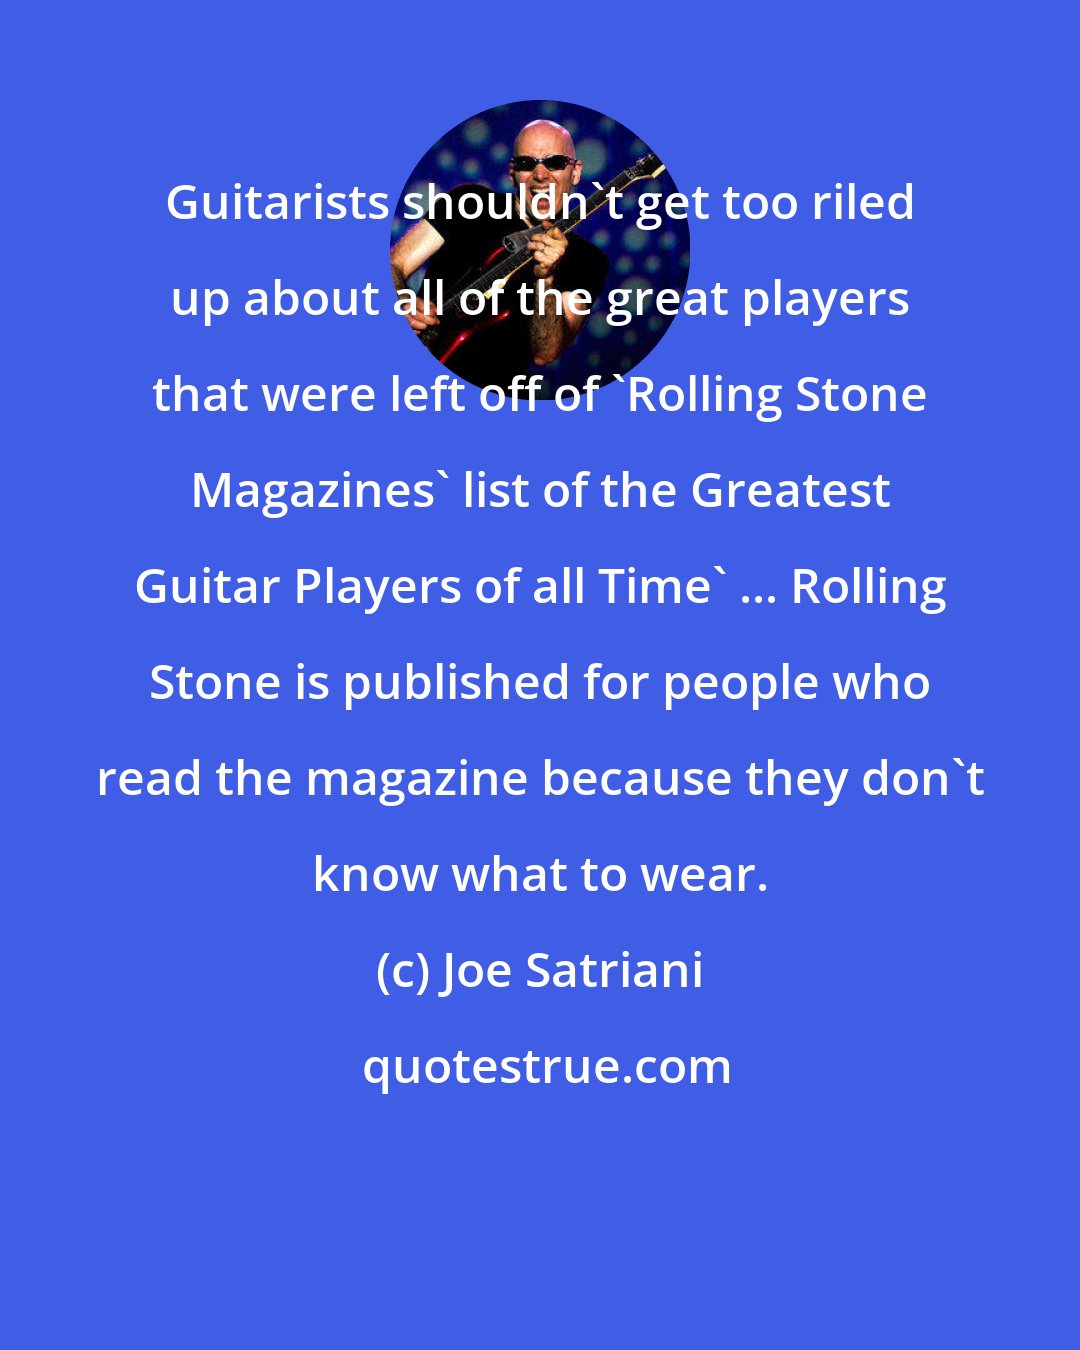 Joe Satriani: Guitarists shouldn't get too riled up about all of the great players that were left off of 'Rolling Stone Magazines' list of the Greatest Guitar Players of all Time' ... Rolling Stone is published for people who read the magazine because they don't know what to wear.